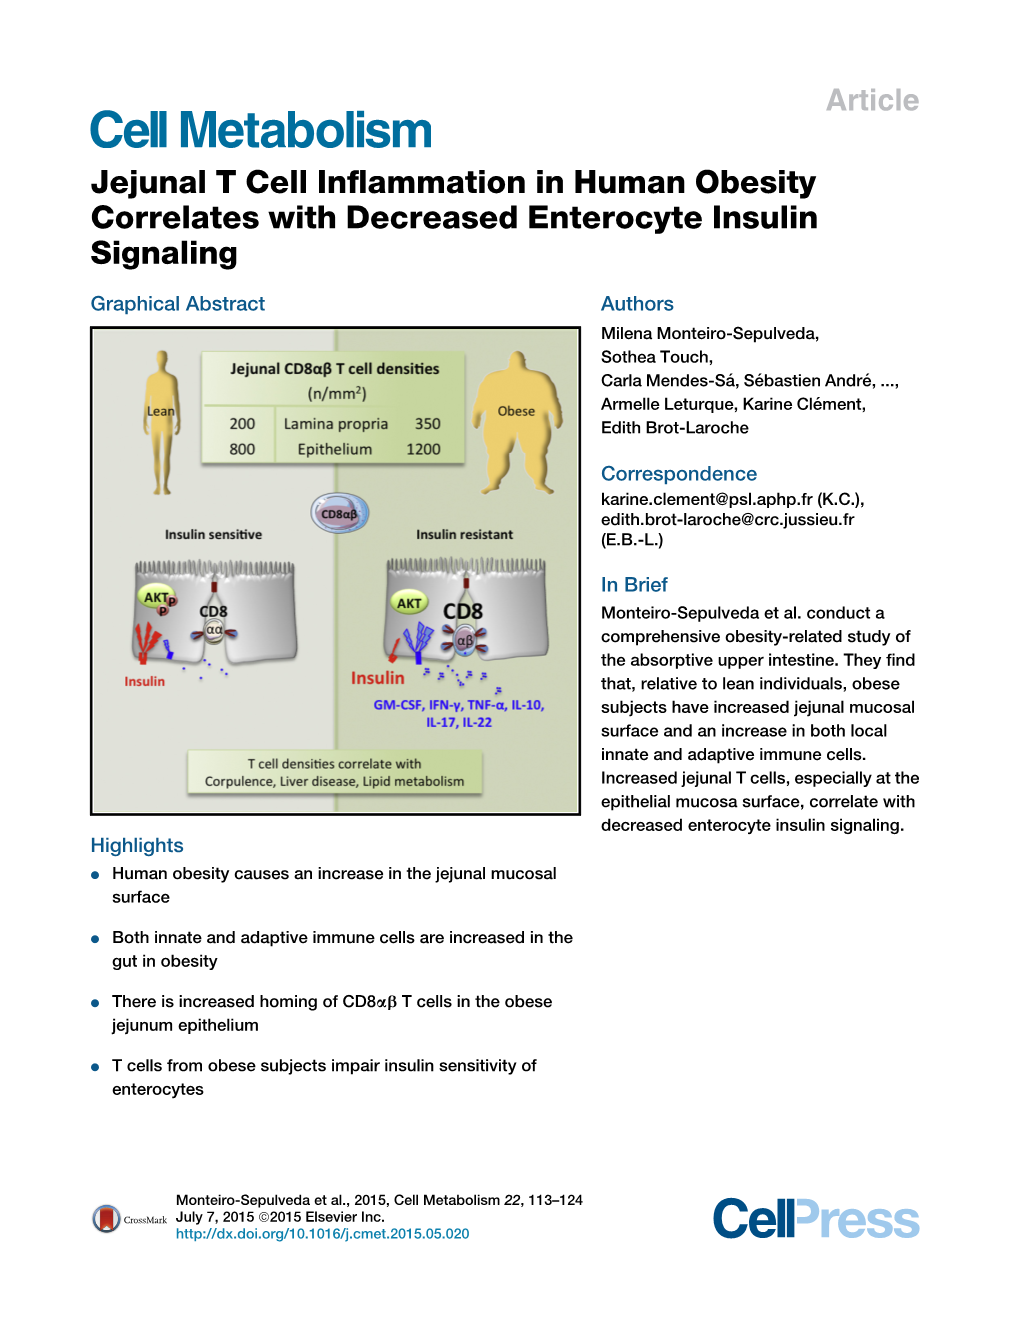 Jejunal T Cell Inflammation in Human Obesity Correlates with Decreased